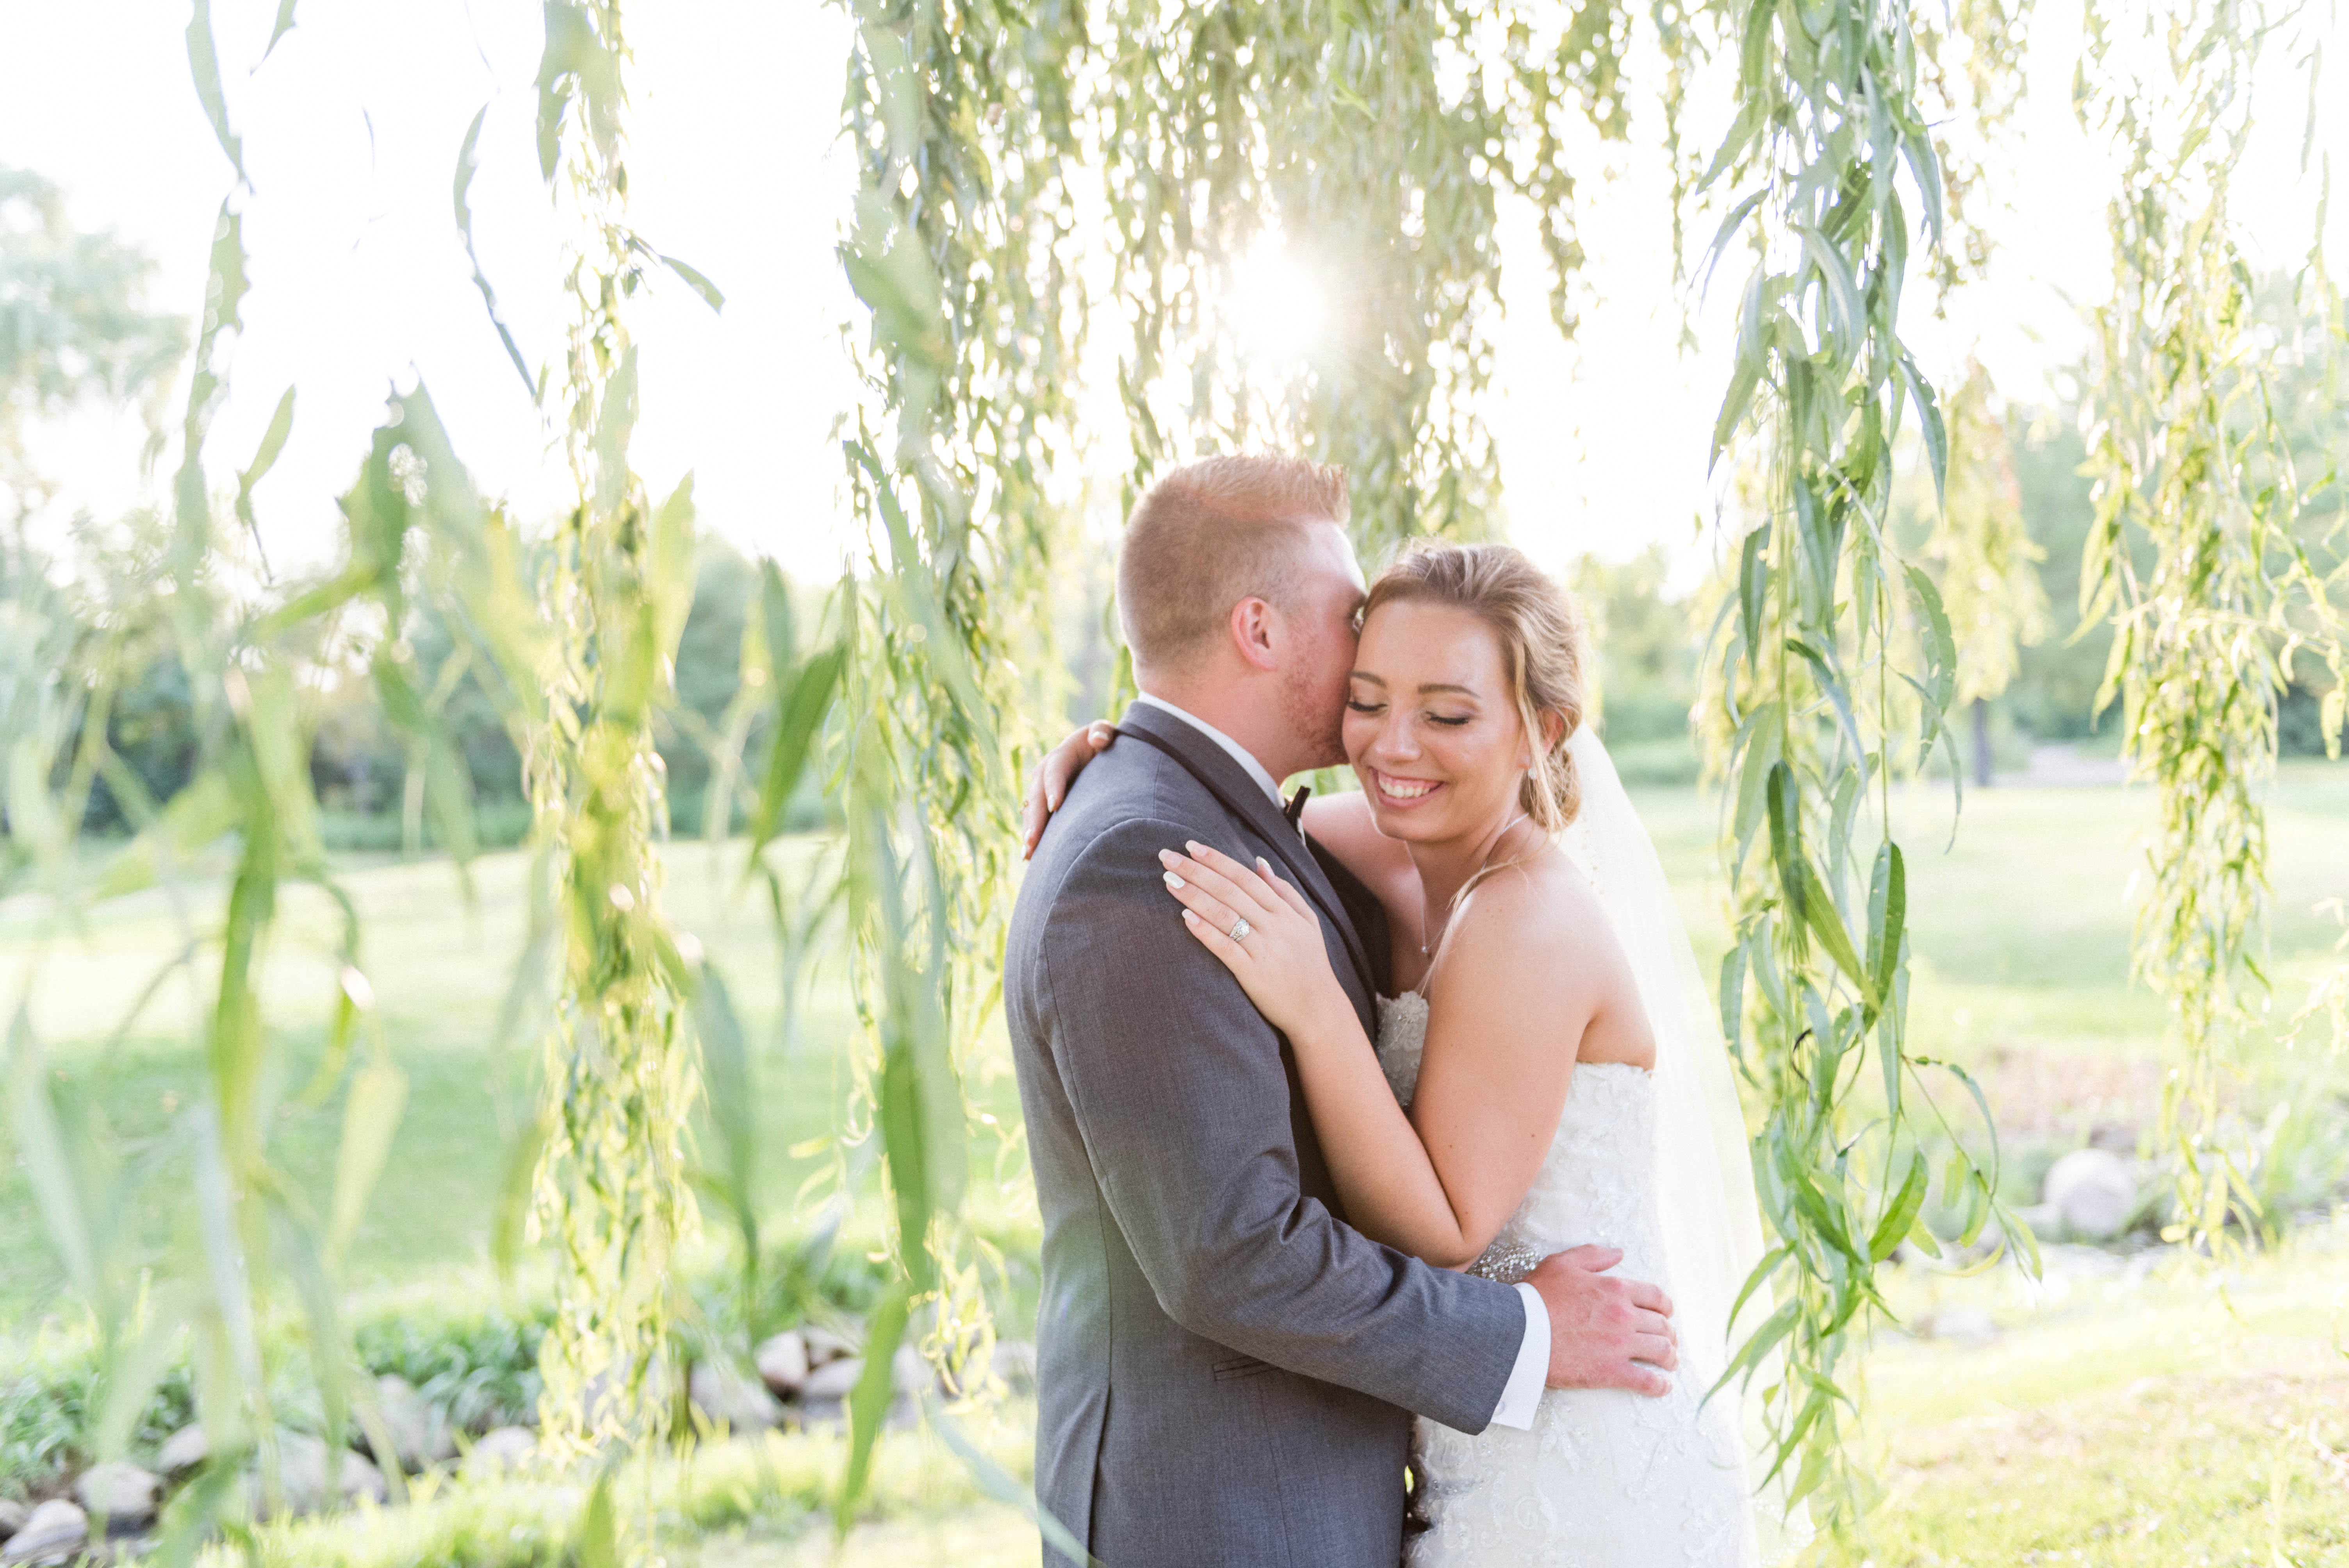 Summer Wedding At Silver Lake Country Club - Jimmy & Tiffany - Sweet Williams Photography Columbus Ohio and Nashville Tennessee